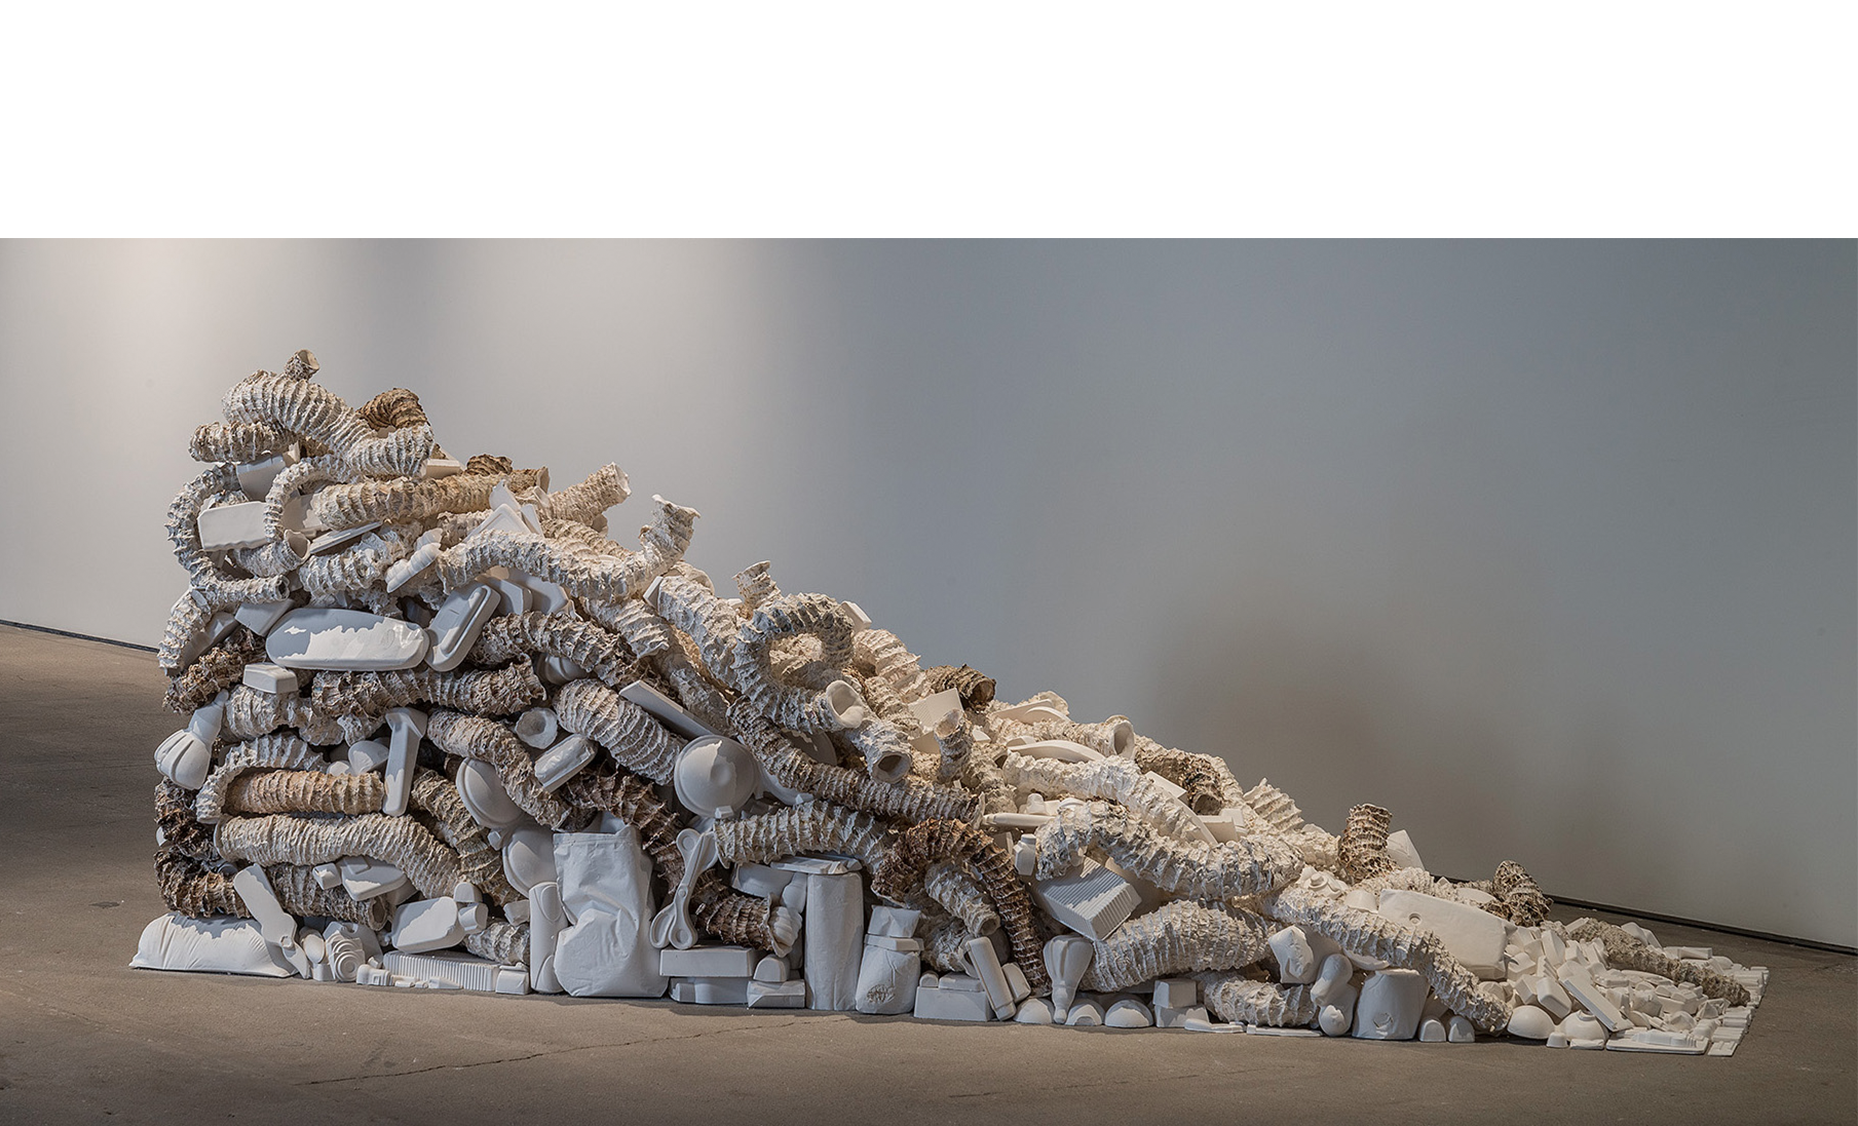   Seemingly Unconnected Events: The Wedge&nbsp;  2007- 2015  Hundreds of plaster casts of organic forms interwoven and interconnected with consumer goods casts*, 90 x 30 x 45”.&nbsp;  Installation at H&amp;R Block Artspace, Kansas City, MO, Fall 2015